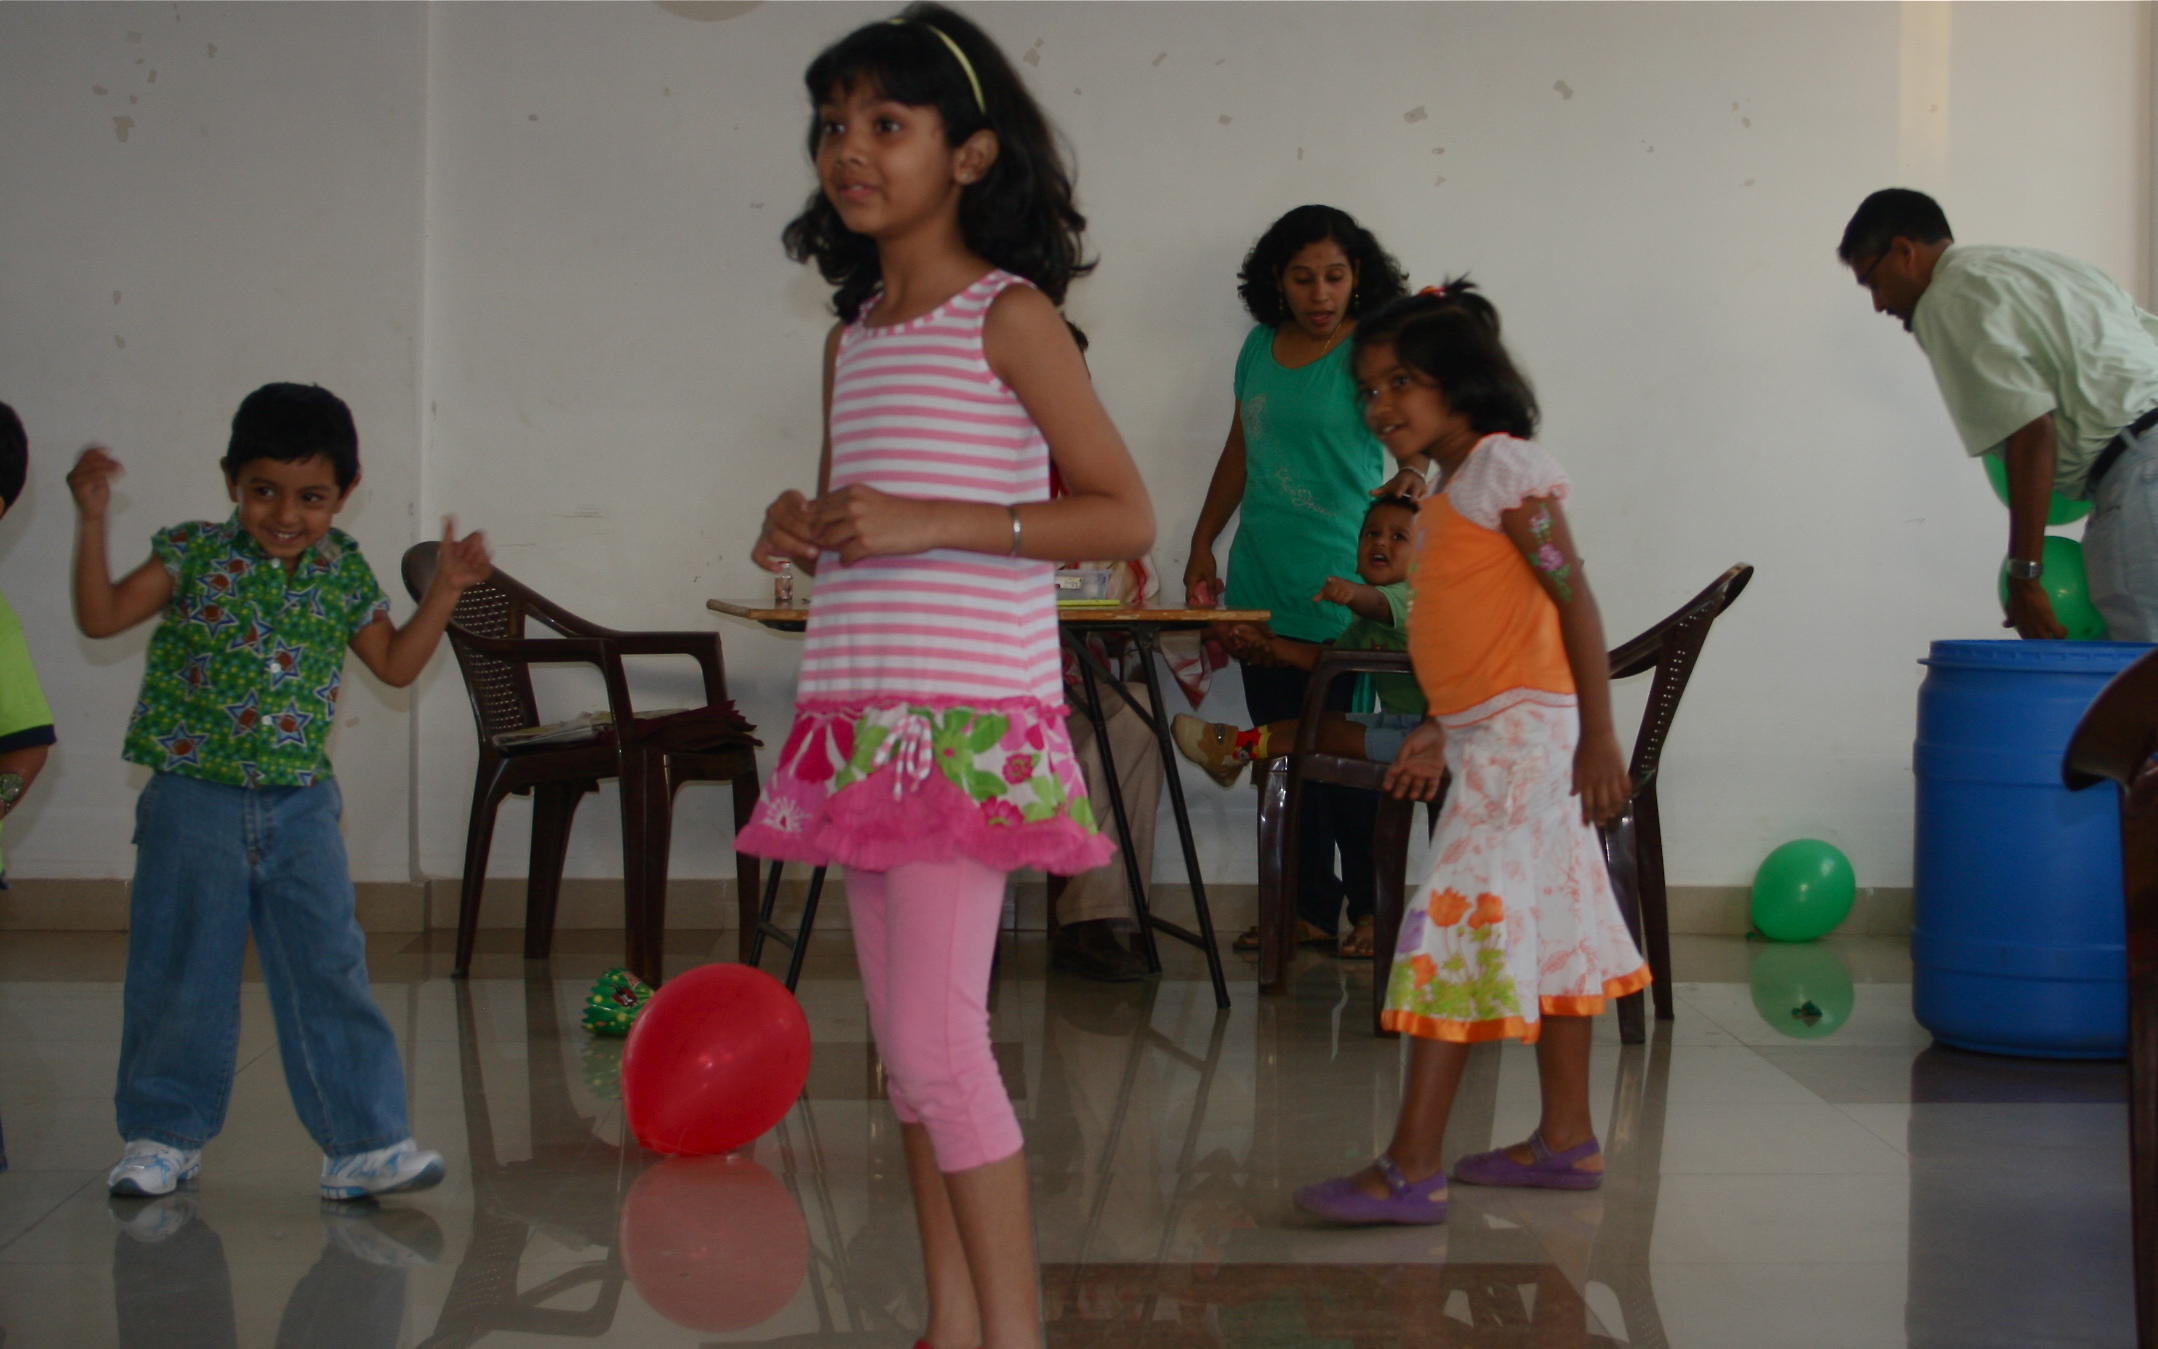 some little girls playing with a red ball in the middle